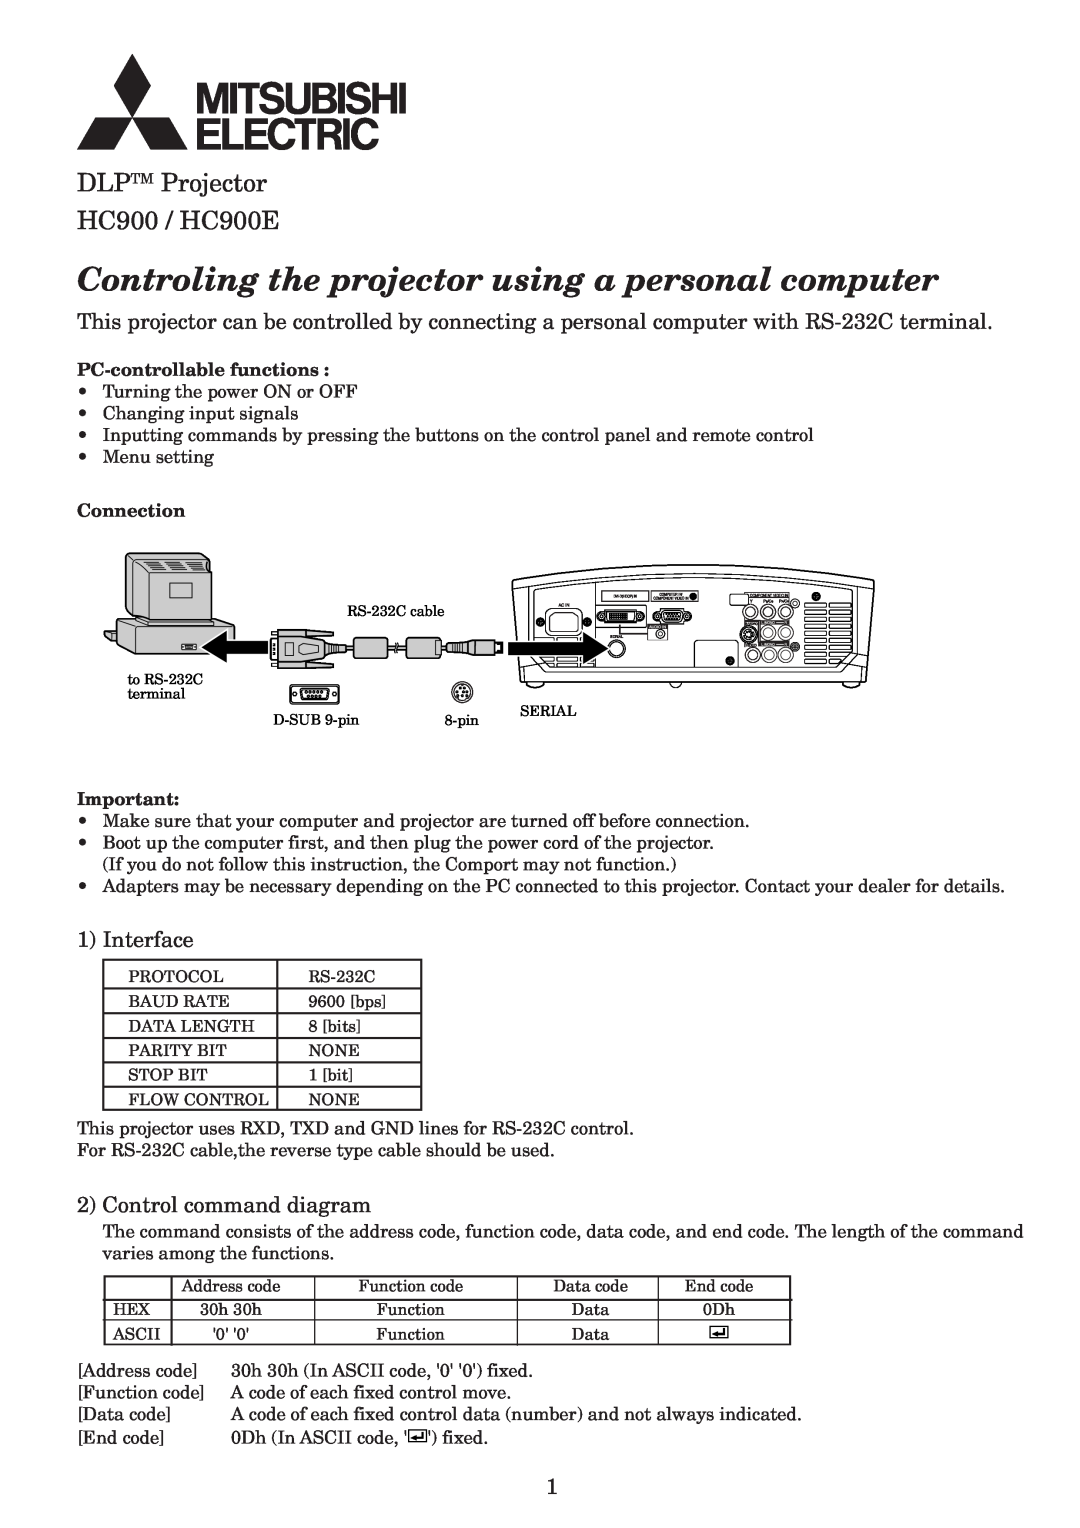 Mitsubishi Electronics HC900E manual Interface, Control command diagram, PC-controllable functions, Connection 